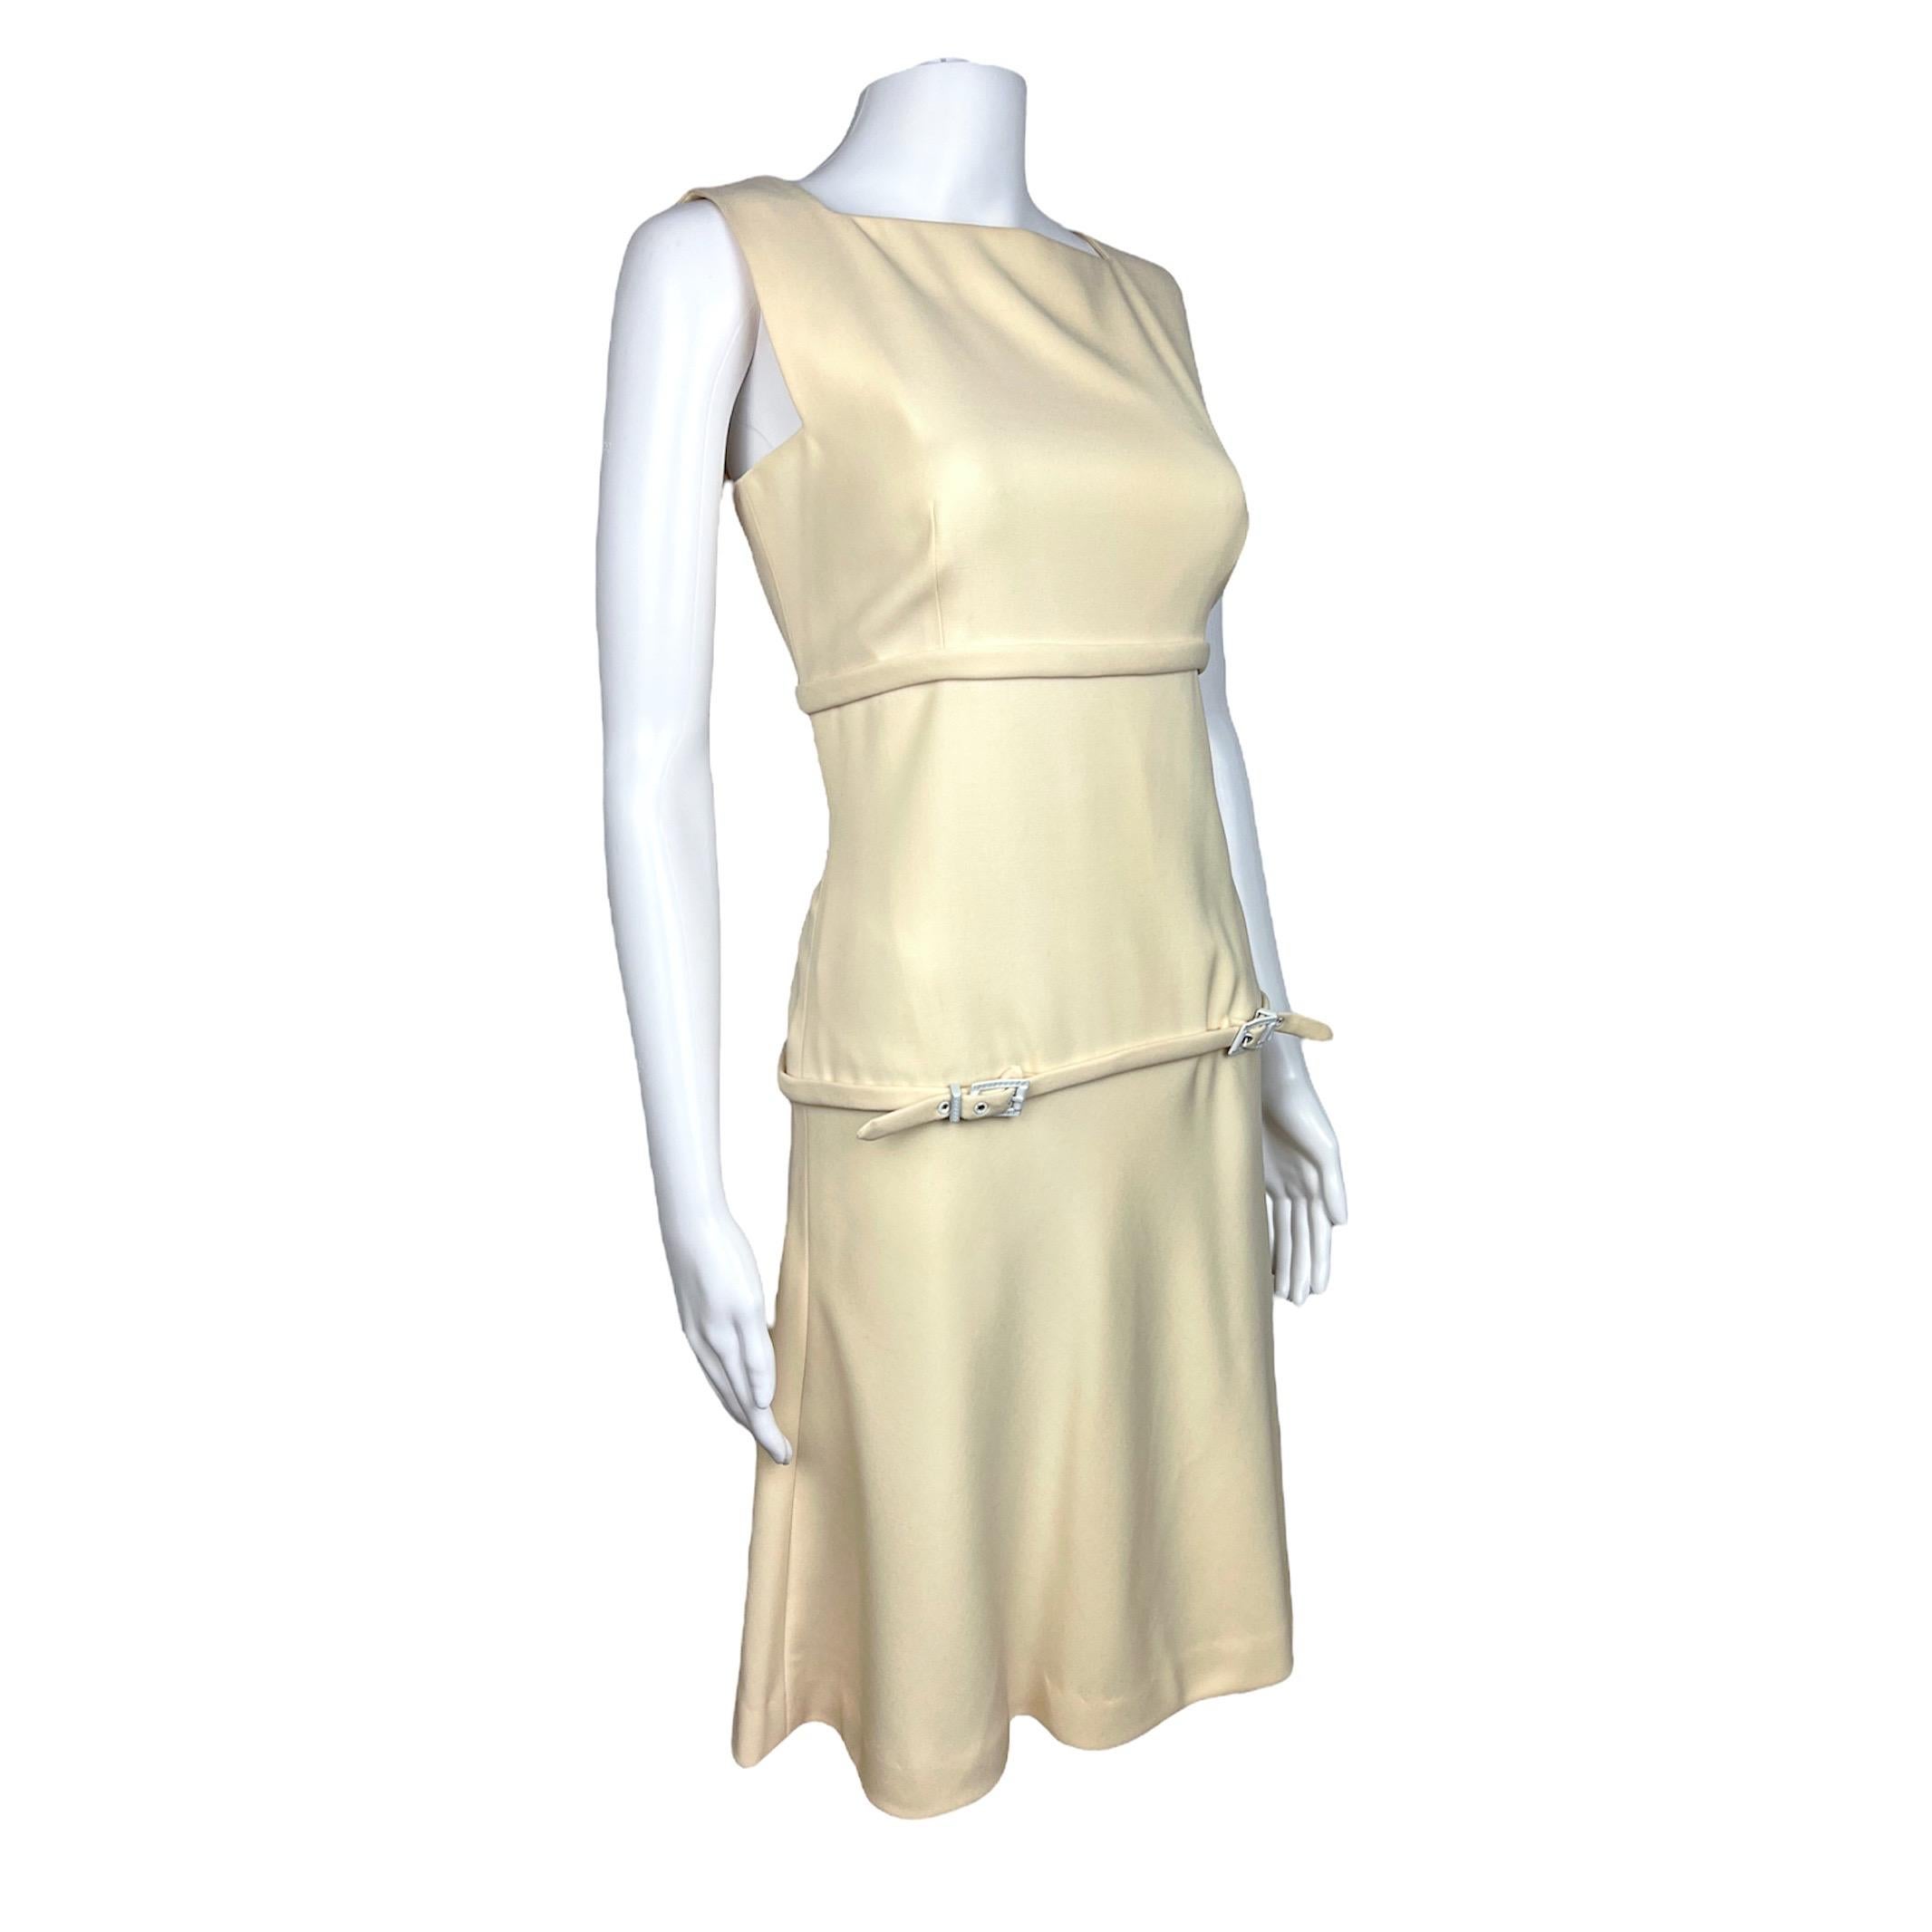 Beautiful Gianni Versace Couture 60s inspired cream dress from Spring Summer 1996 collection. The dress is knee length, with thin adjustable belts including classic Versace Areca pattern details on the hardware and classic Versace medusa head logo